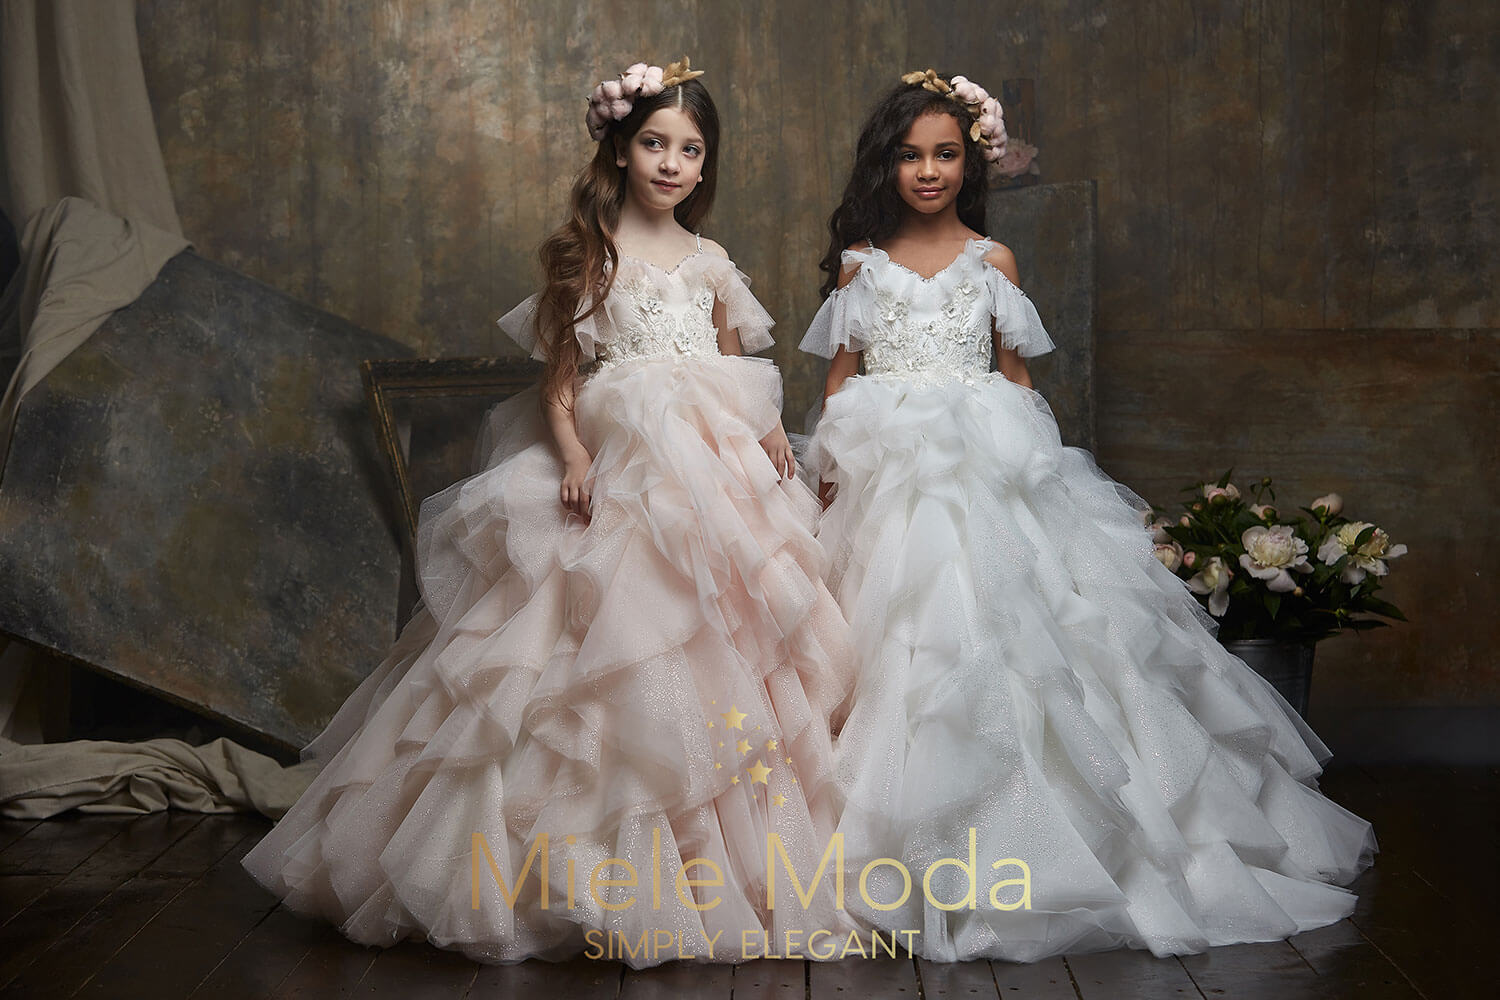 Pretty girl wearing Grace Flower Girl Couture Dress-by Miele Moda Boutique